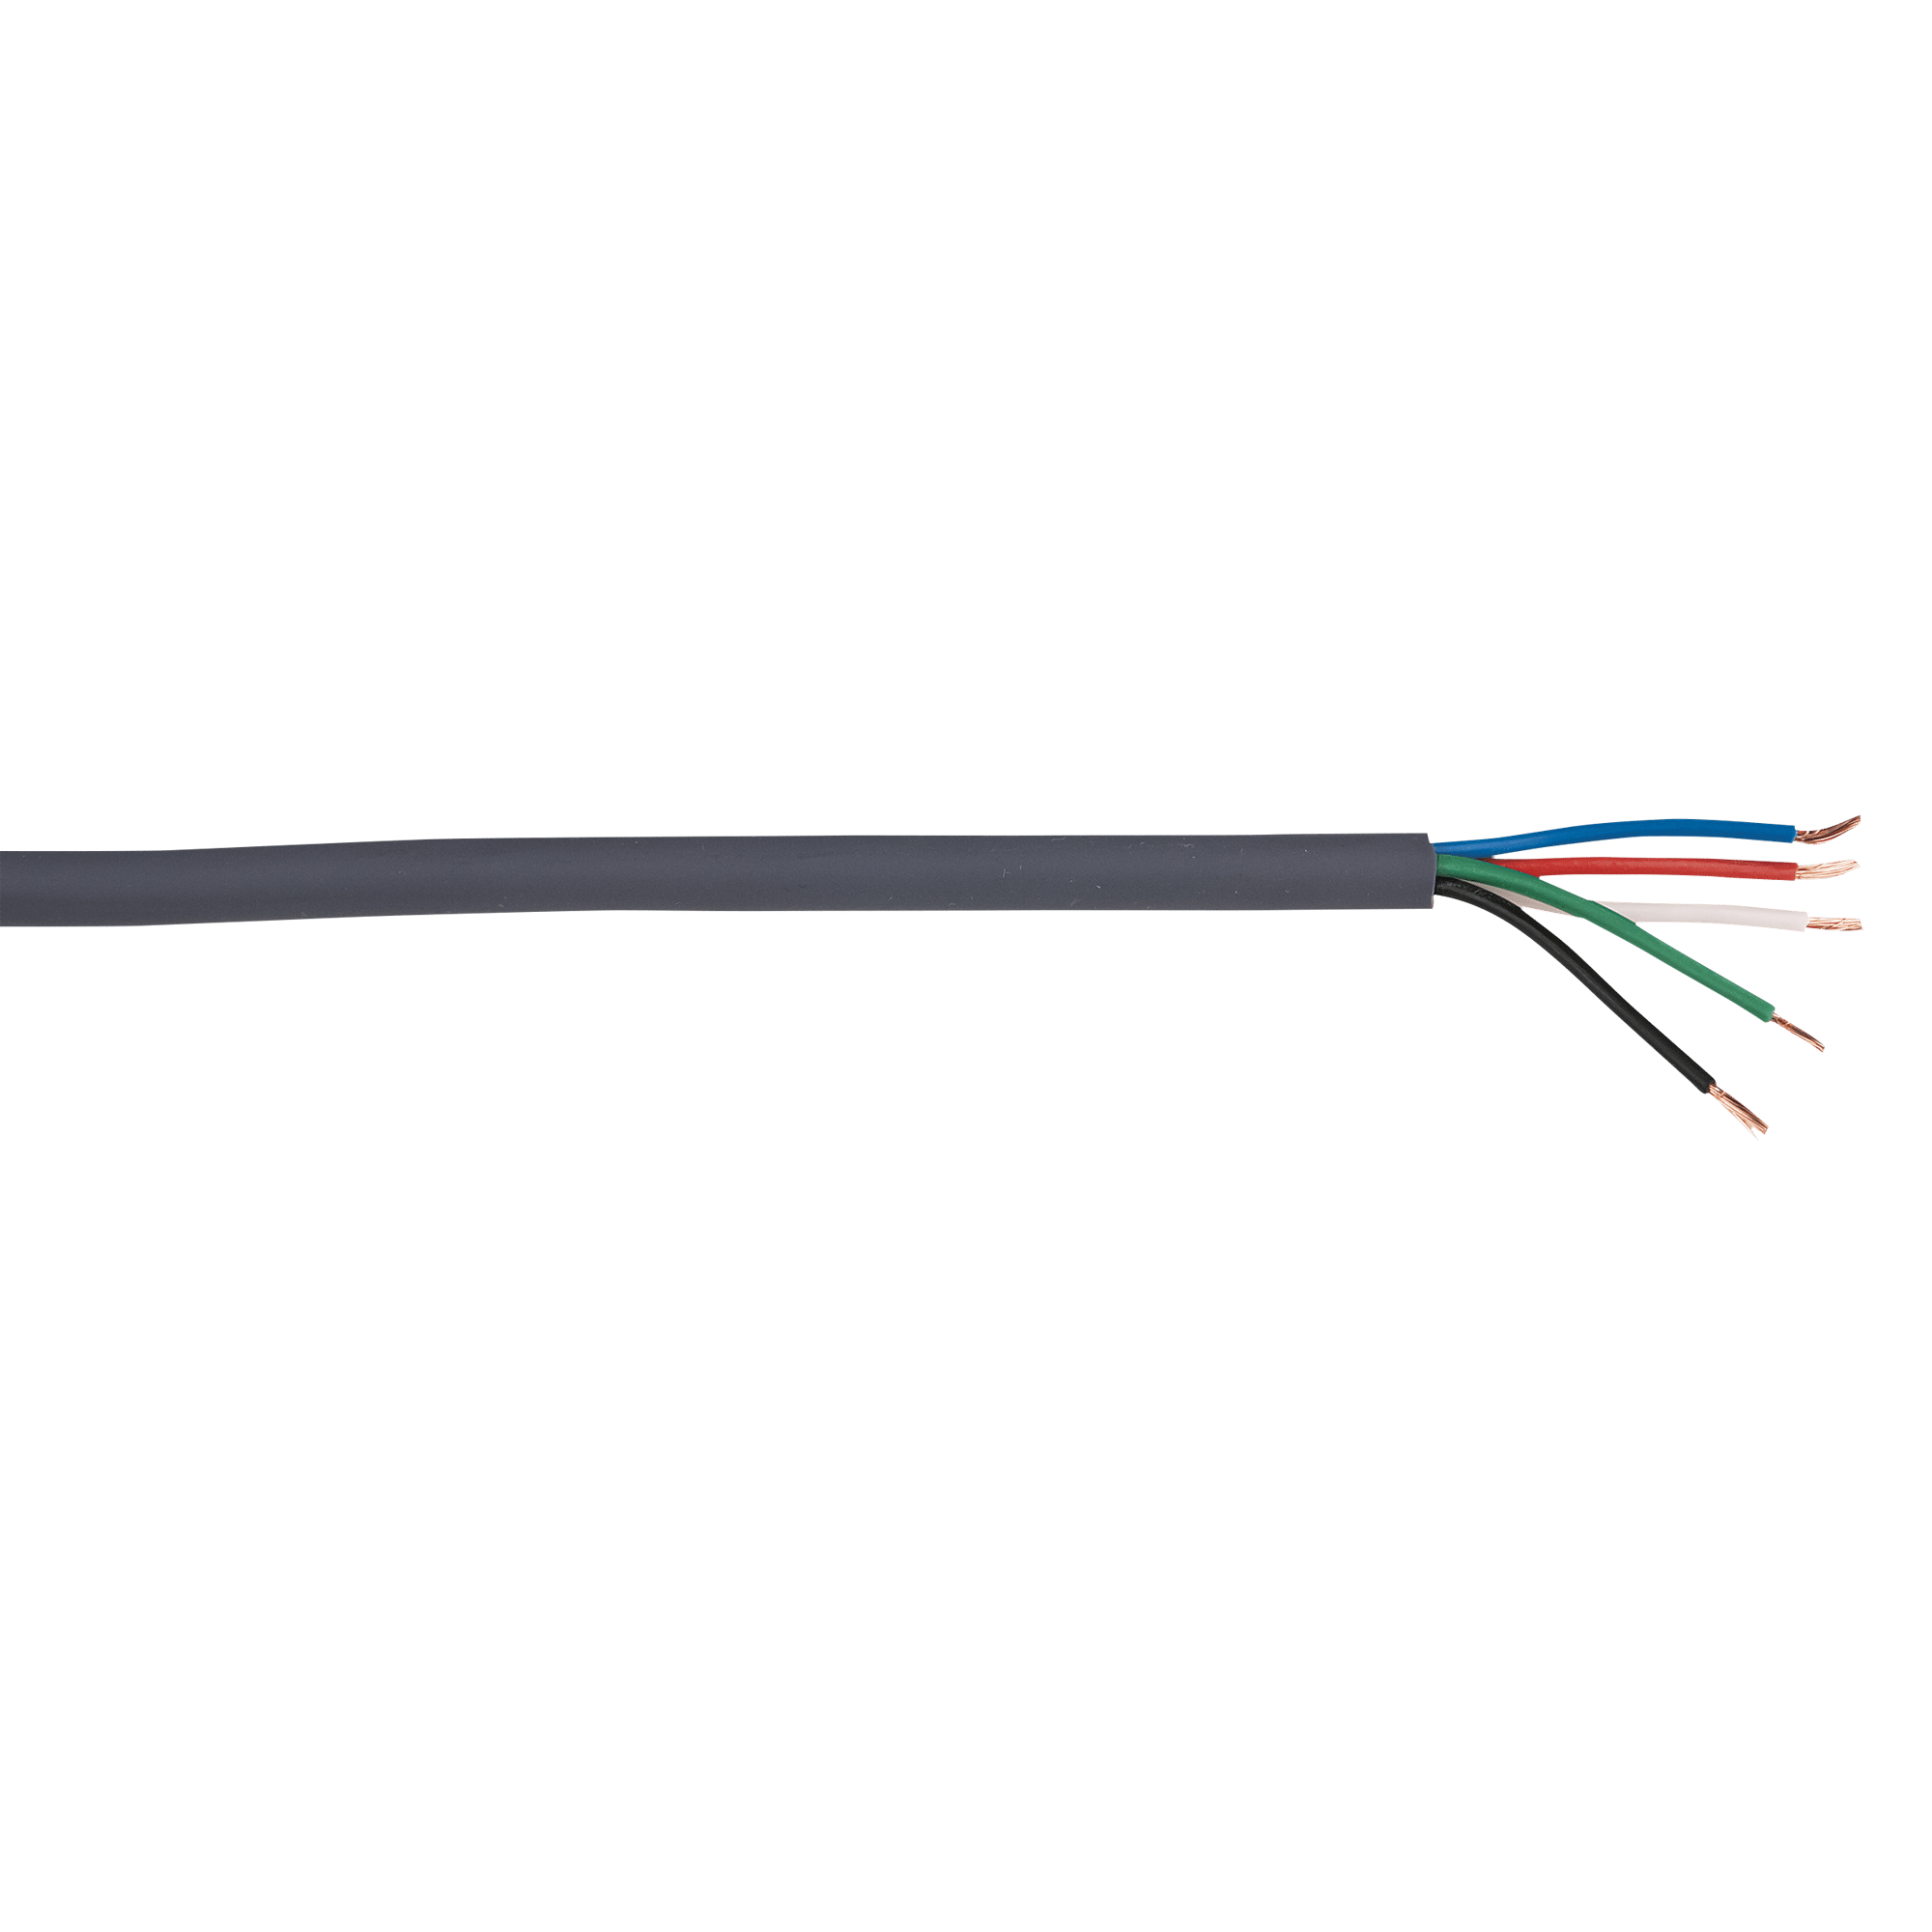 LED Control Cable 5 x 0.75 mm² - Onlinediscowinkel.nl